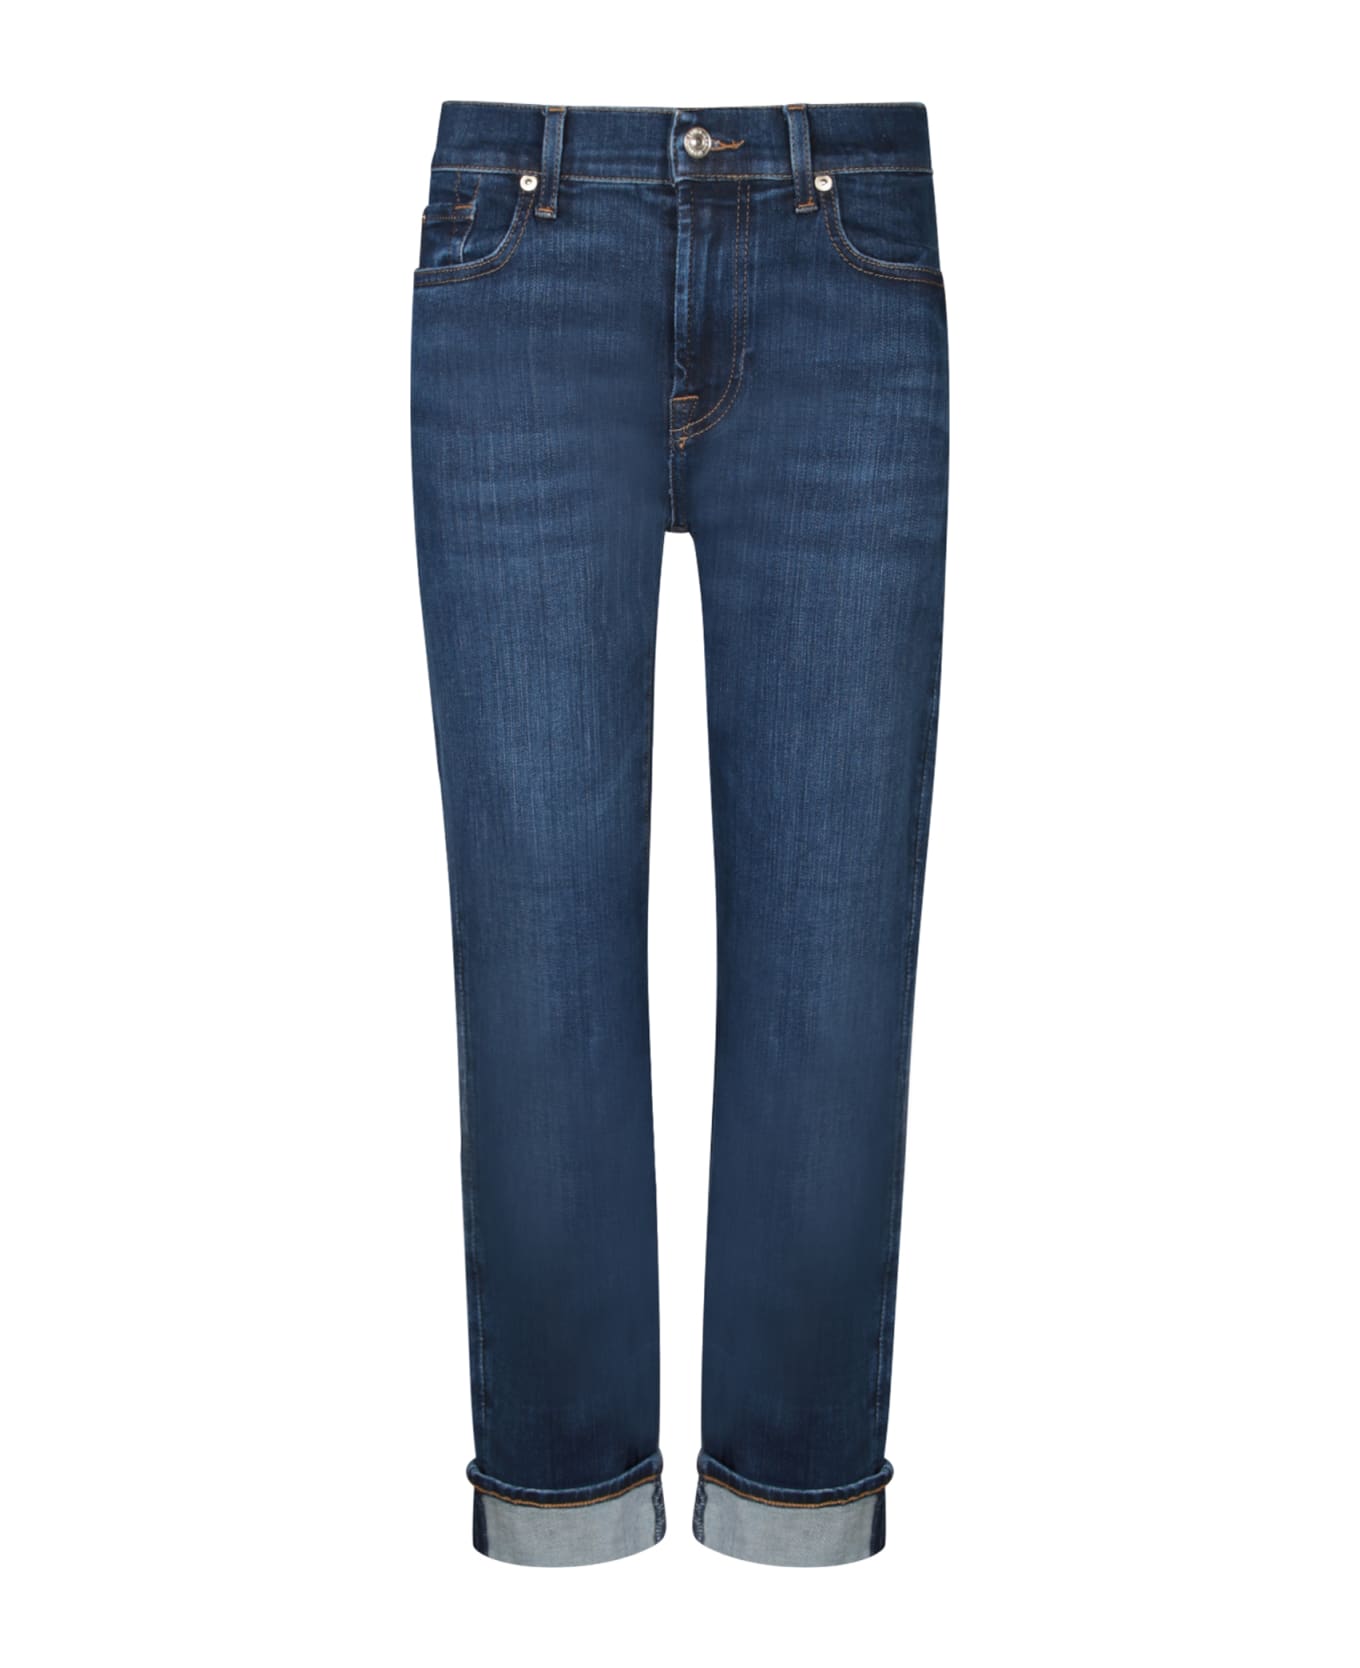 7 For All Mankind Relaxed Skinny Blue Jeans - Blue